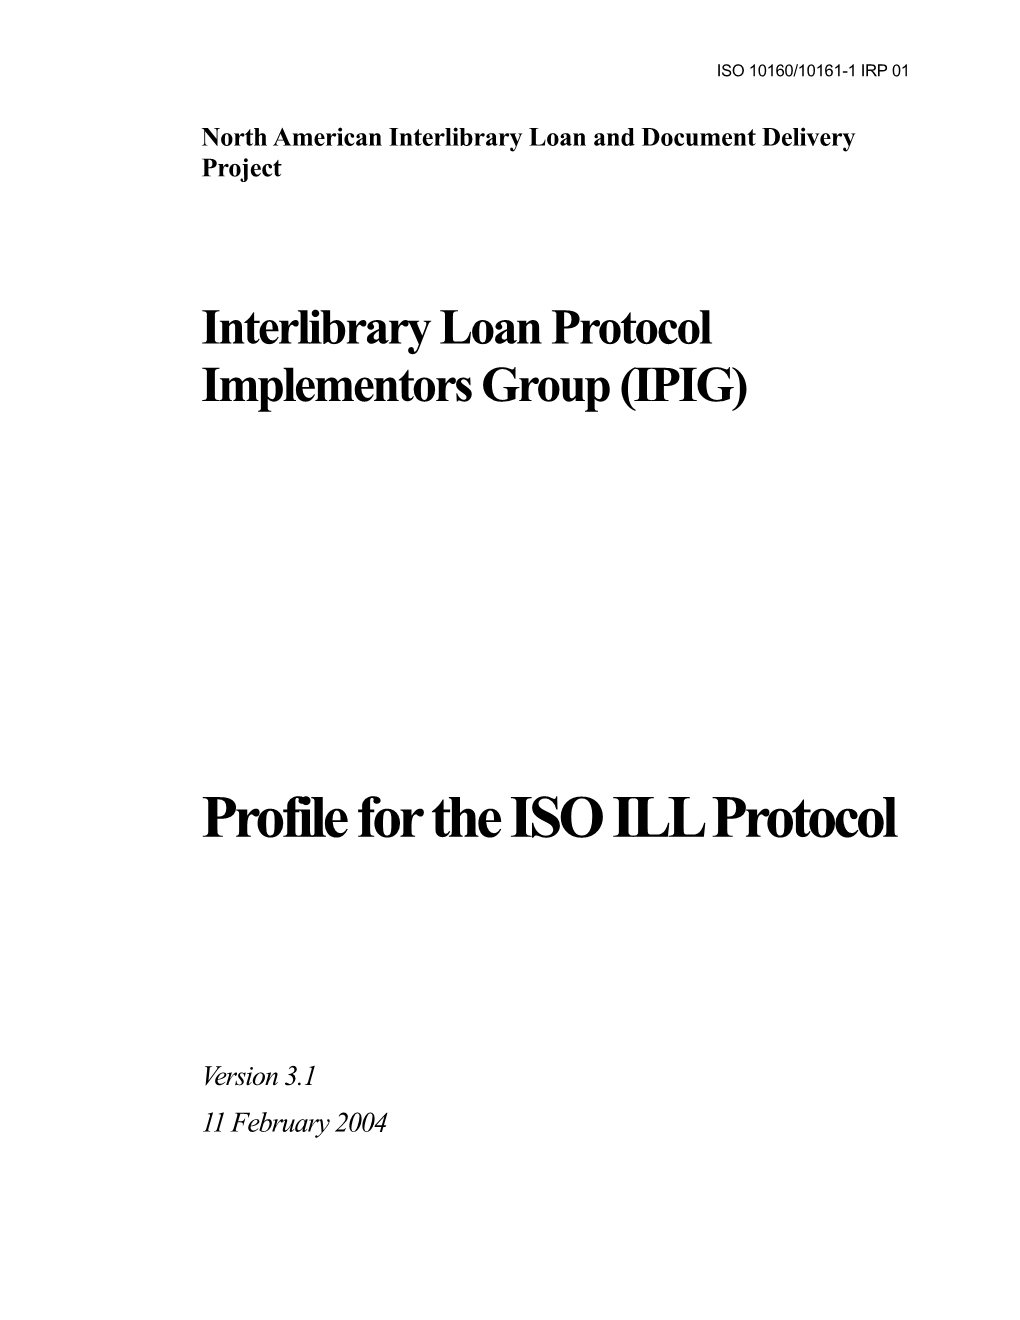 IPIG Profile for the ISO ILL Protocol